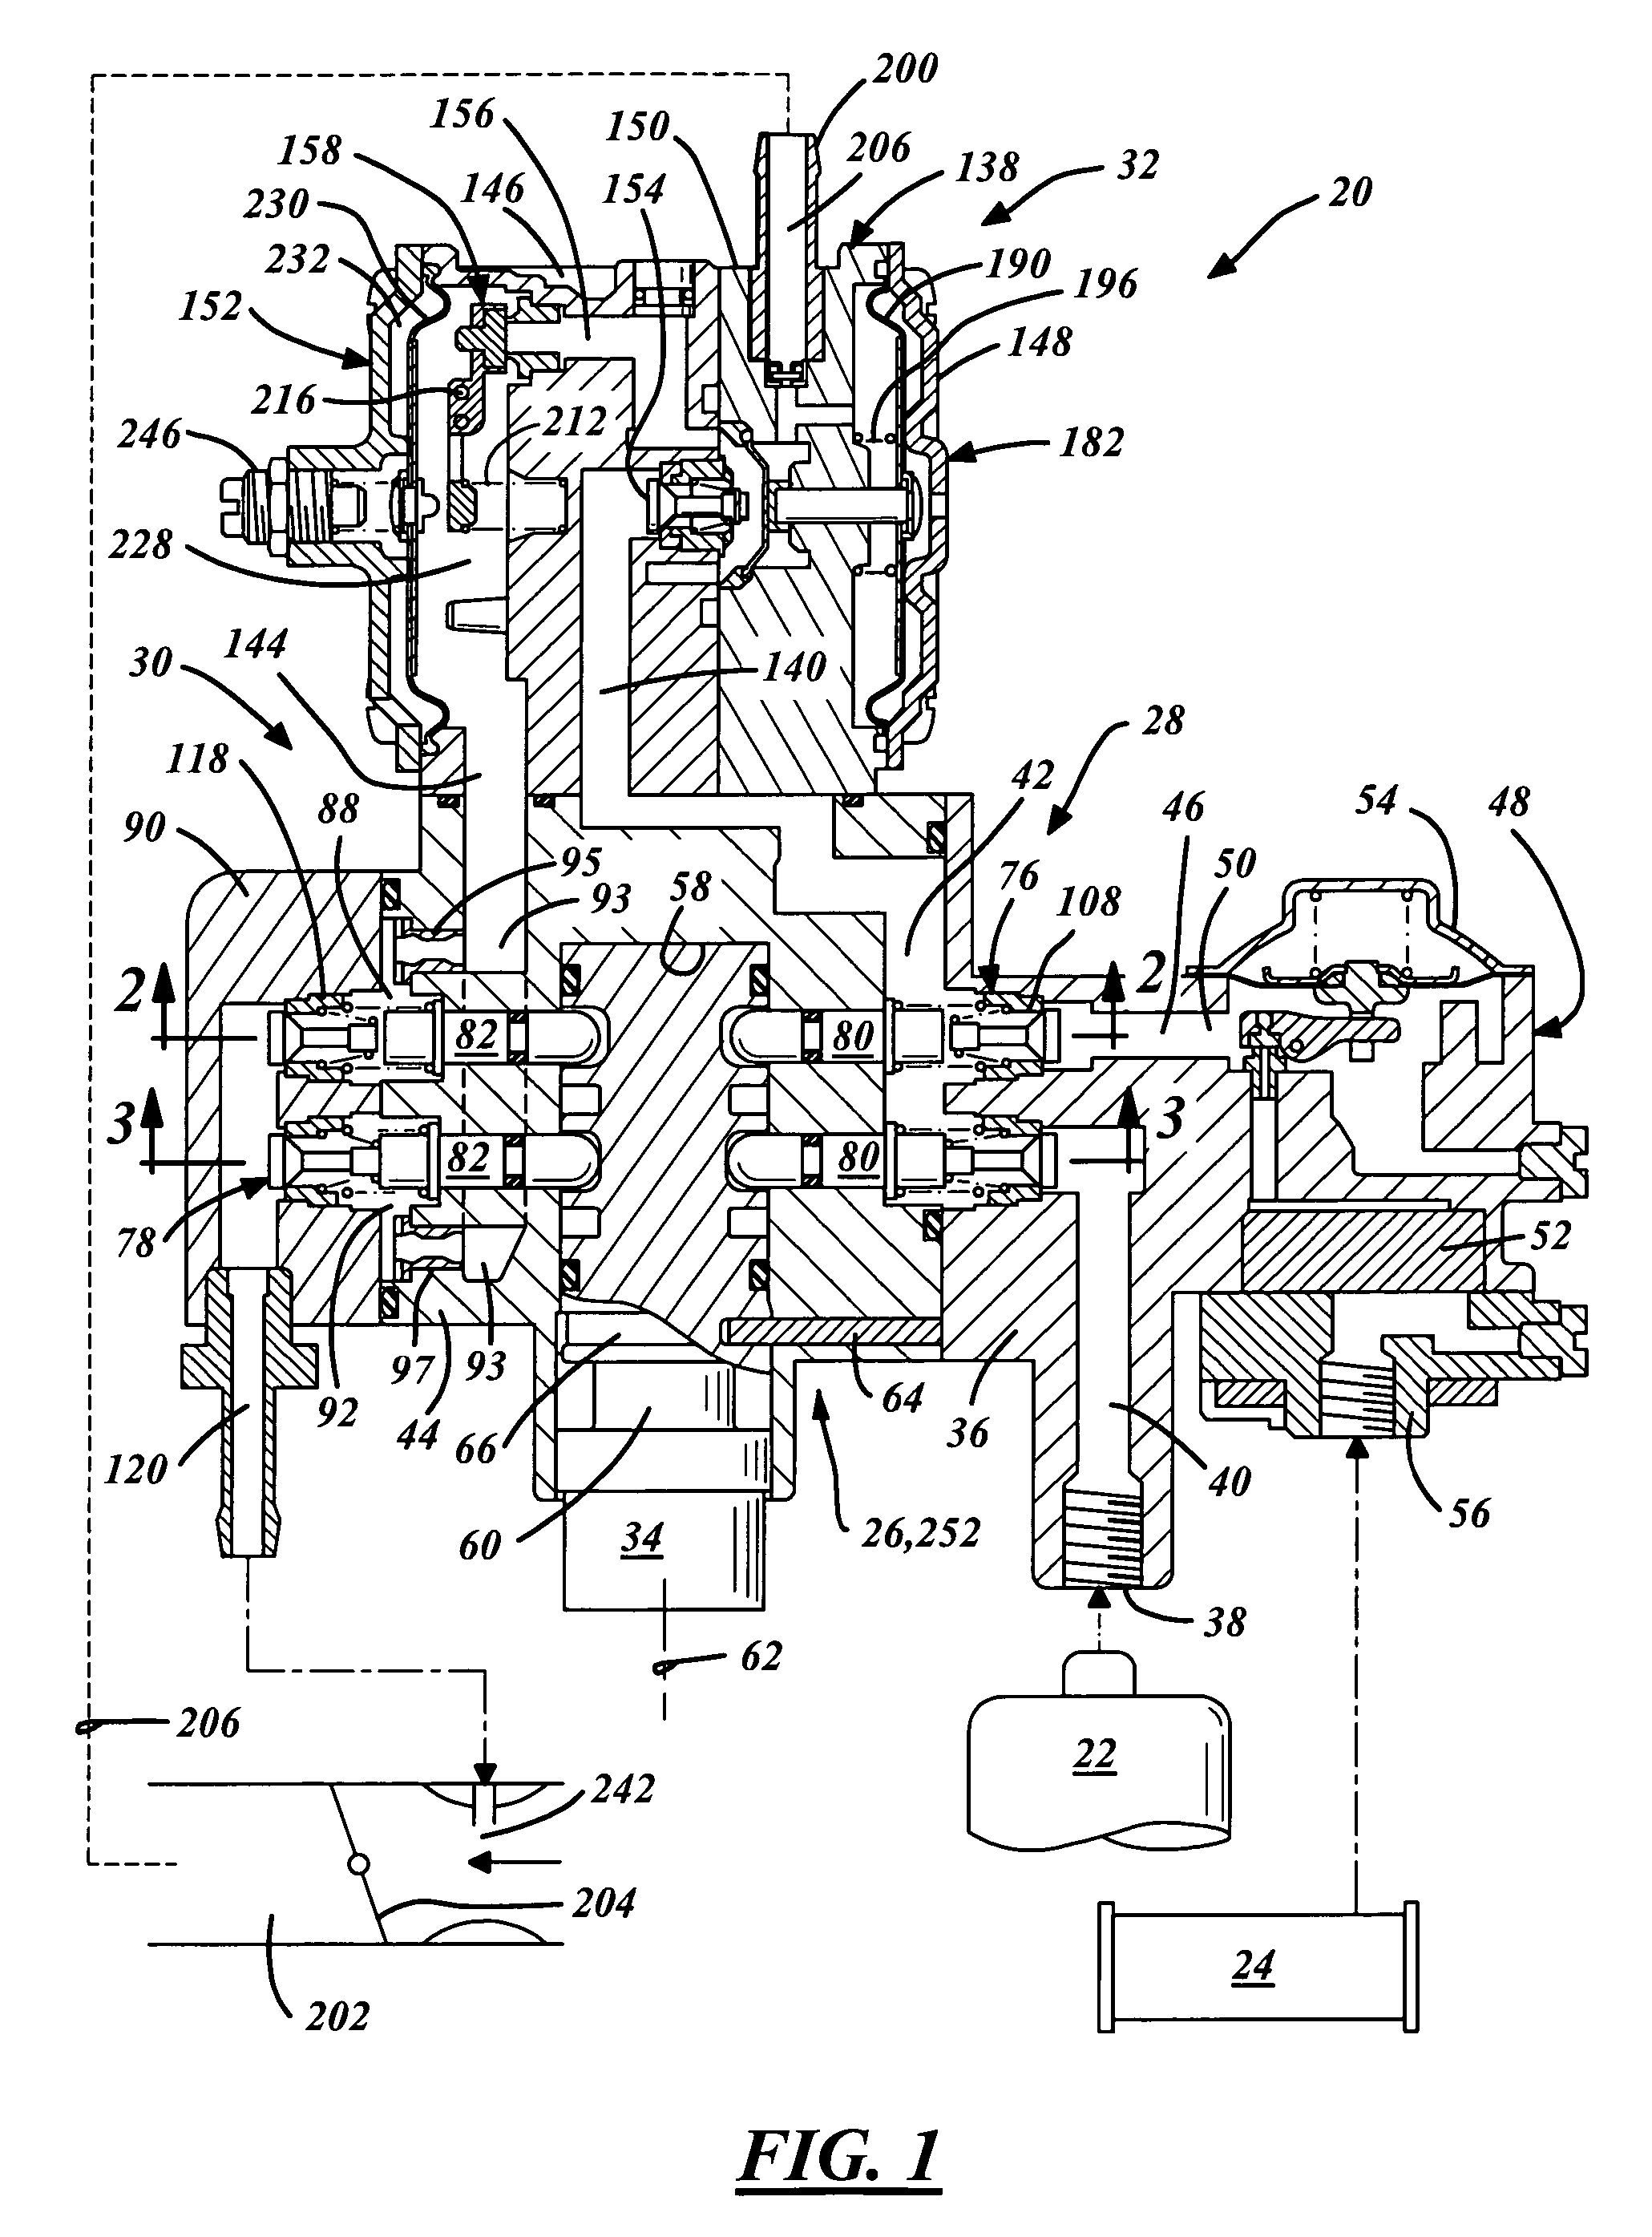 Multi-gaseous fuel control device for a combustion engine with a carburetor